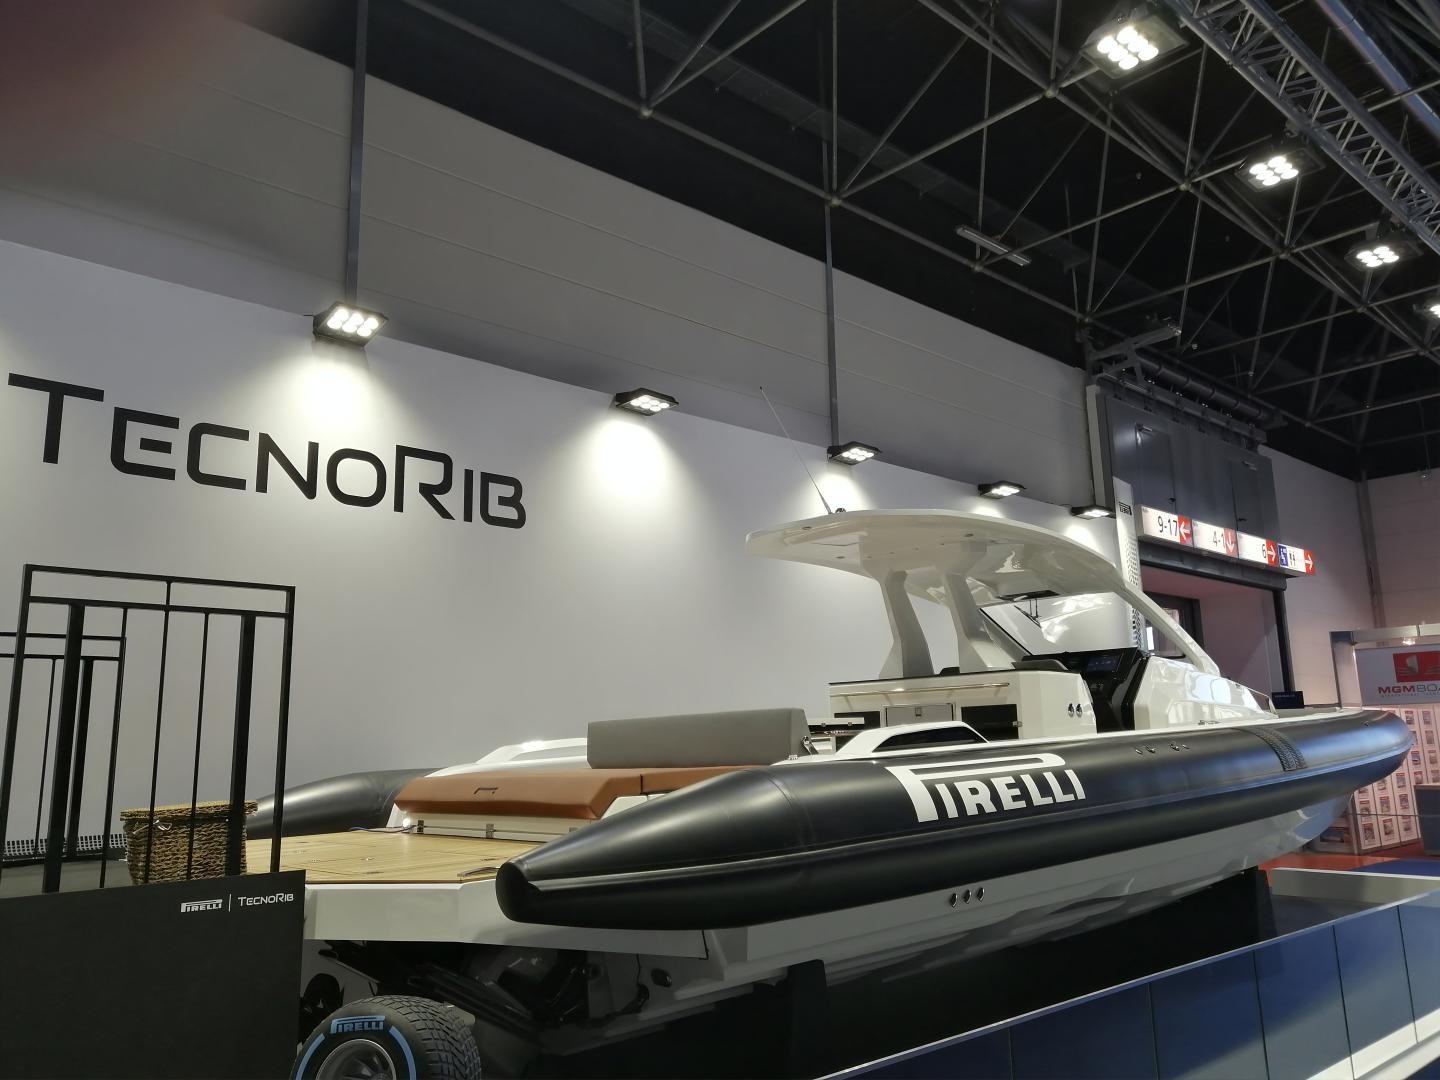 TecnoRib takes the new PIRELLI  42 at NauticSud and continues its network expansion in Europe